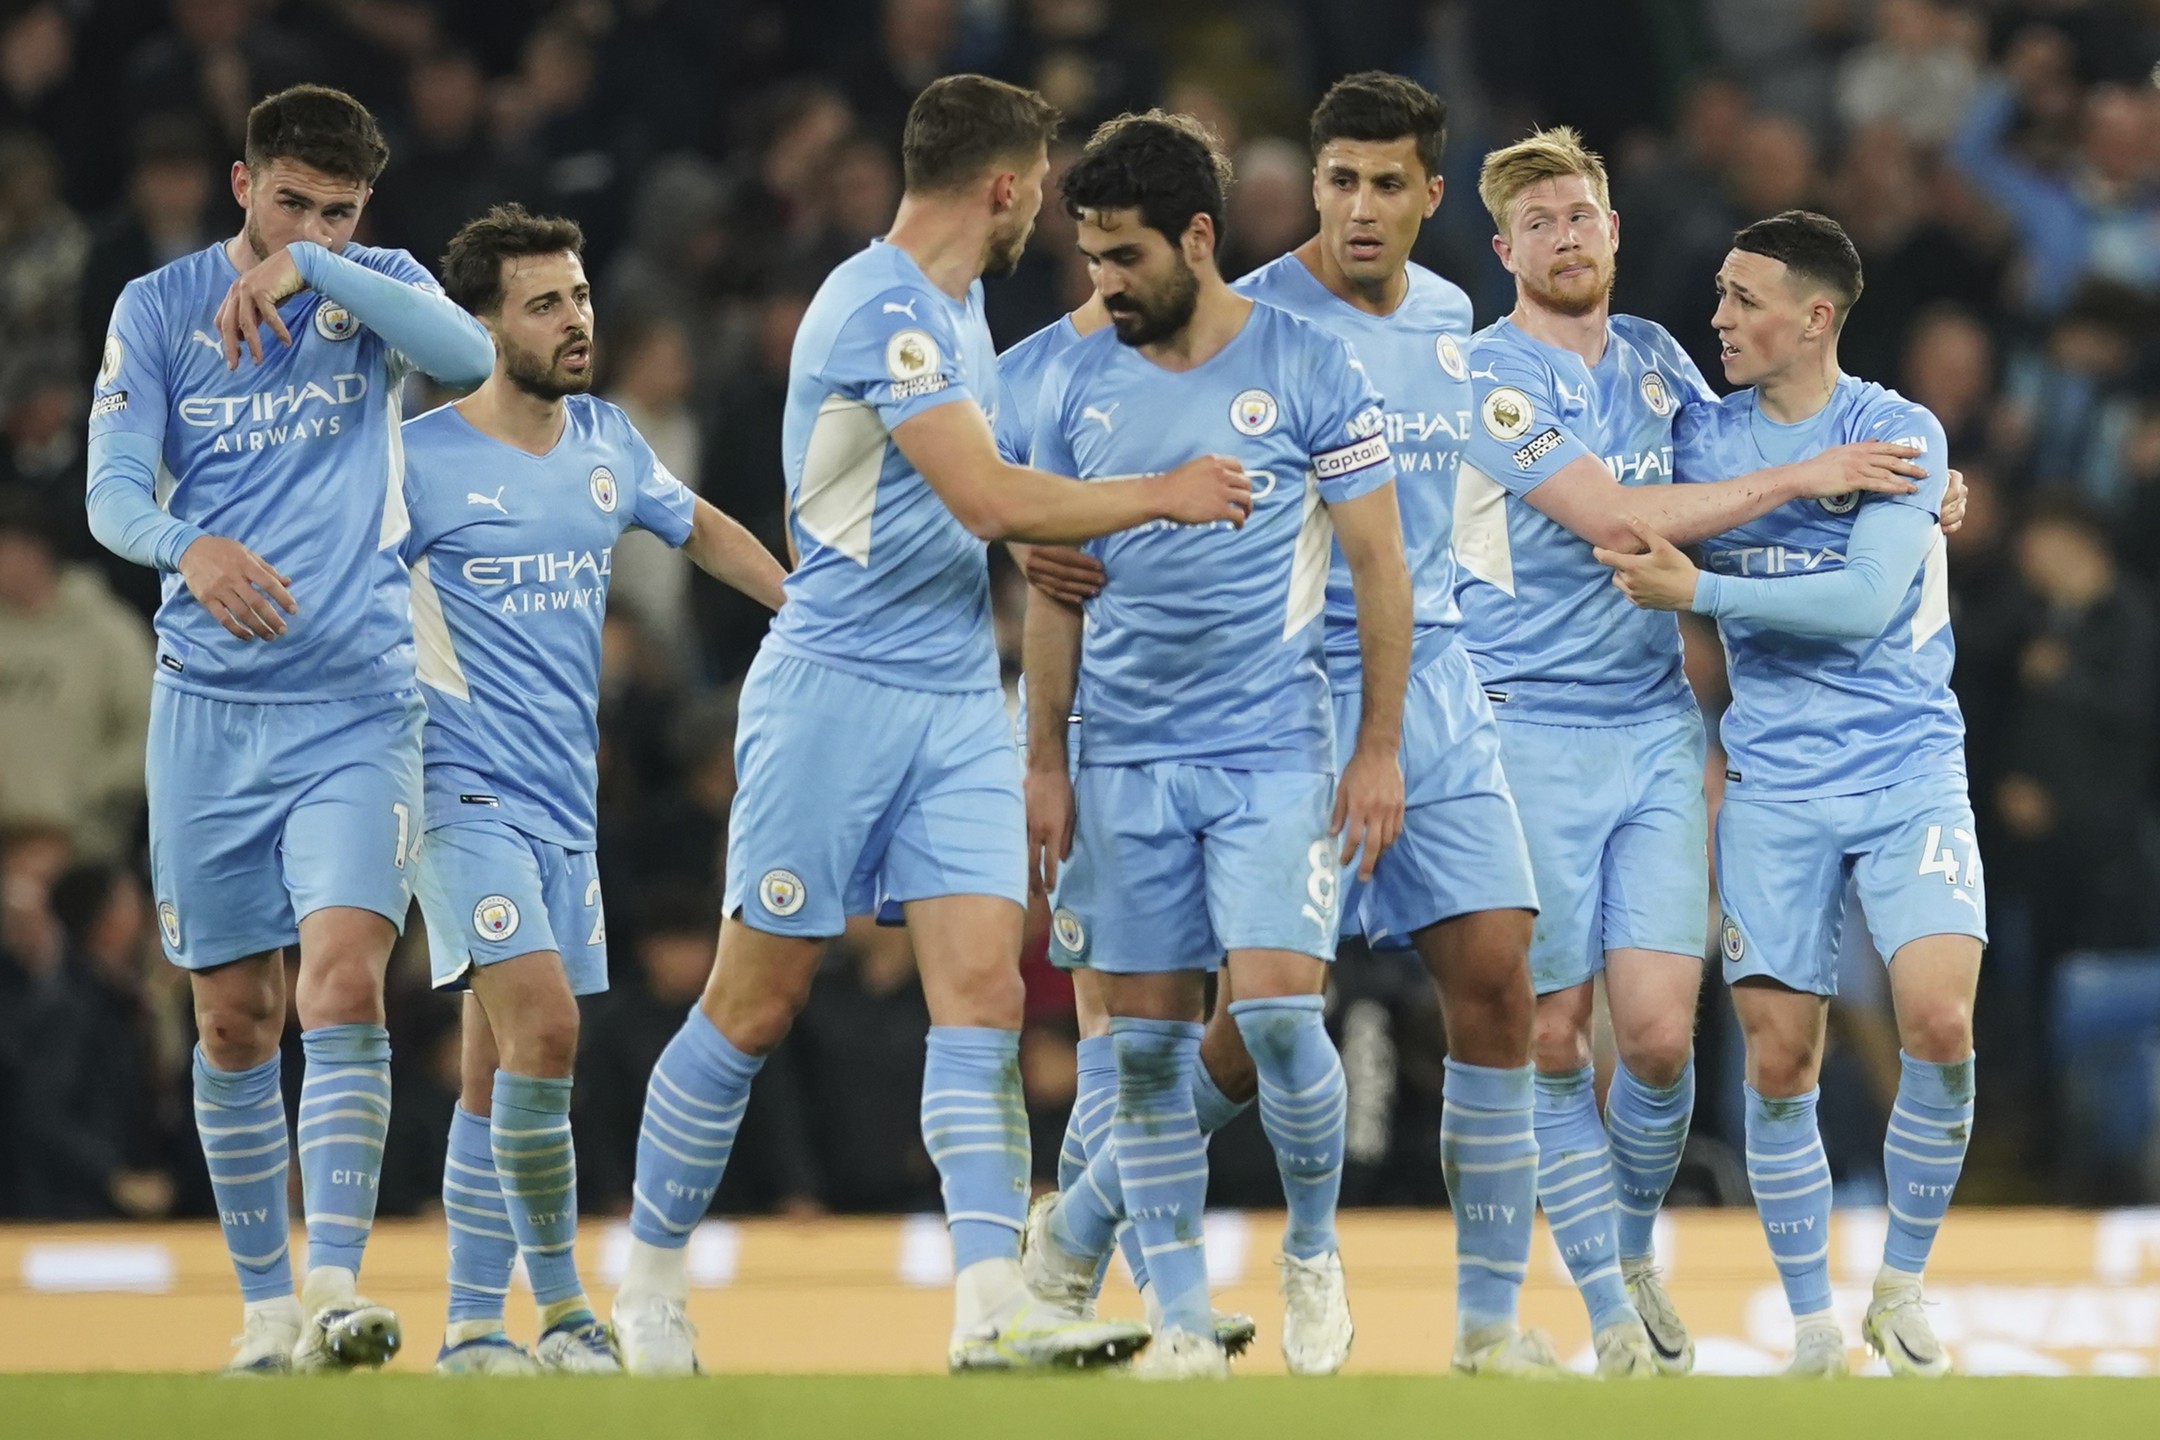 Manchester City Brighton, goes top of League Points Table